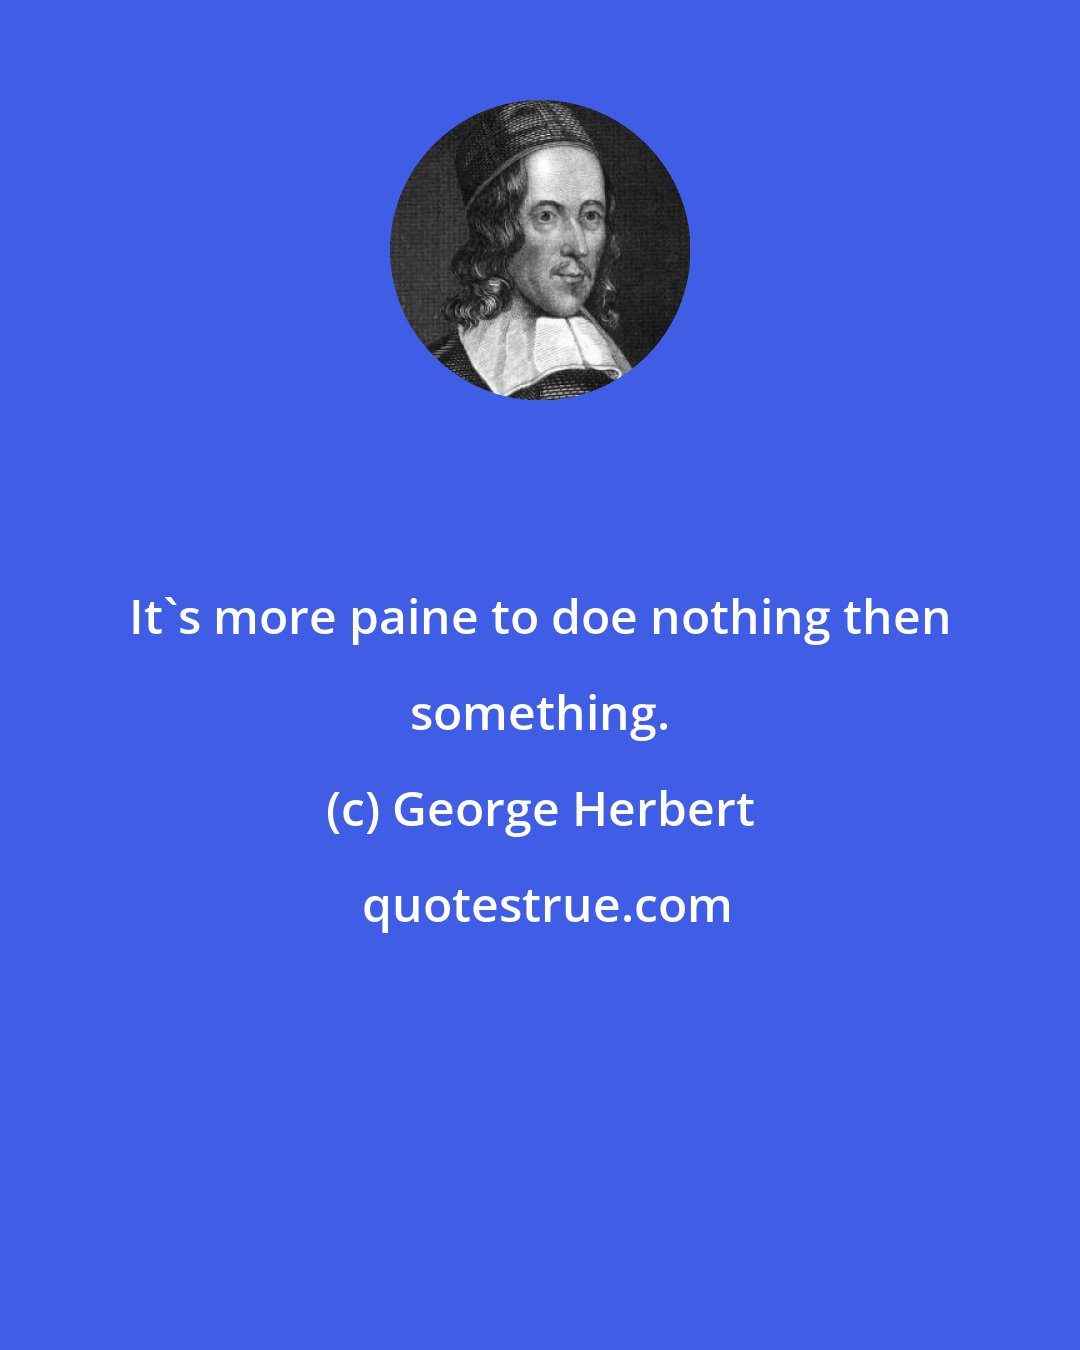 George Herbert: It's more paine to doe nothing then something.